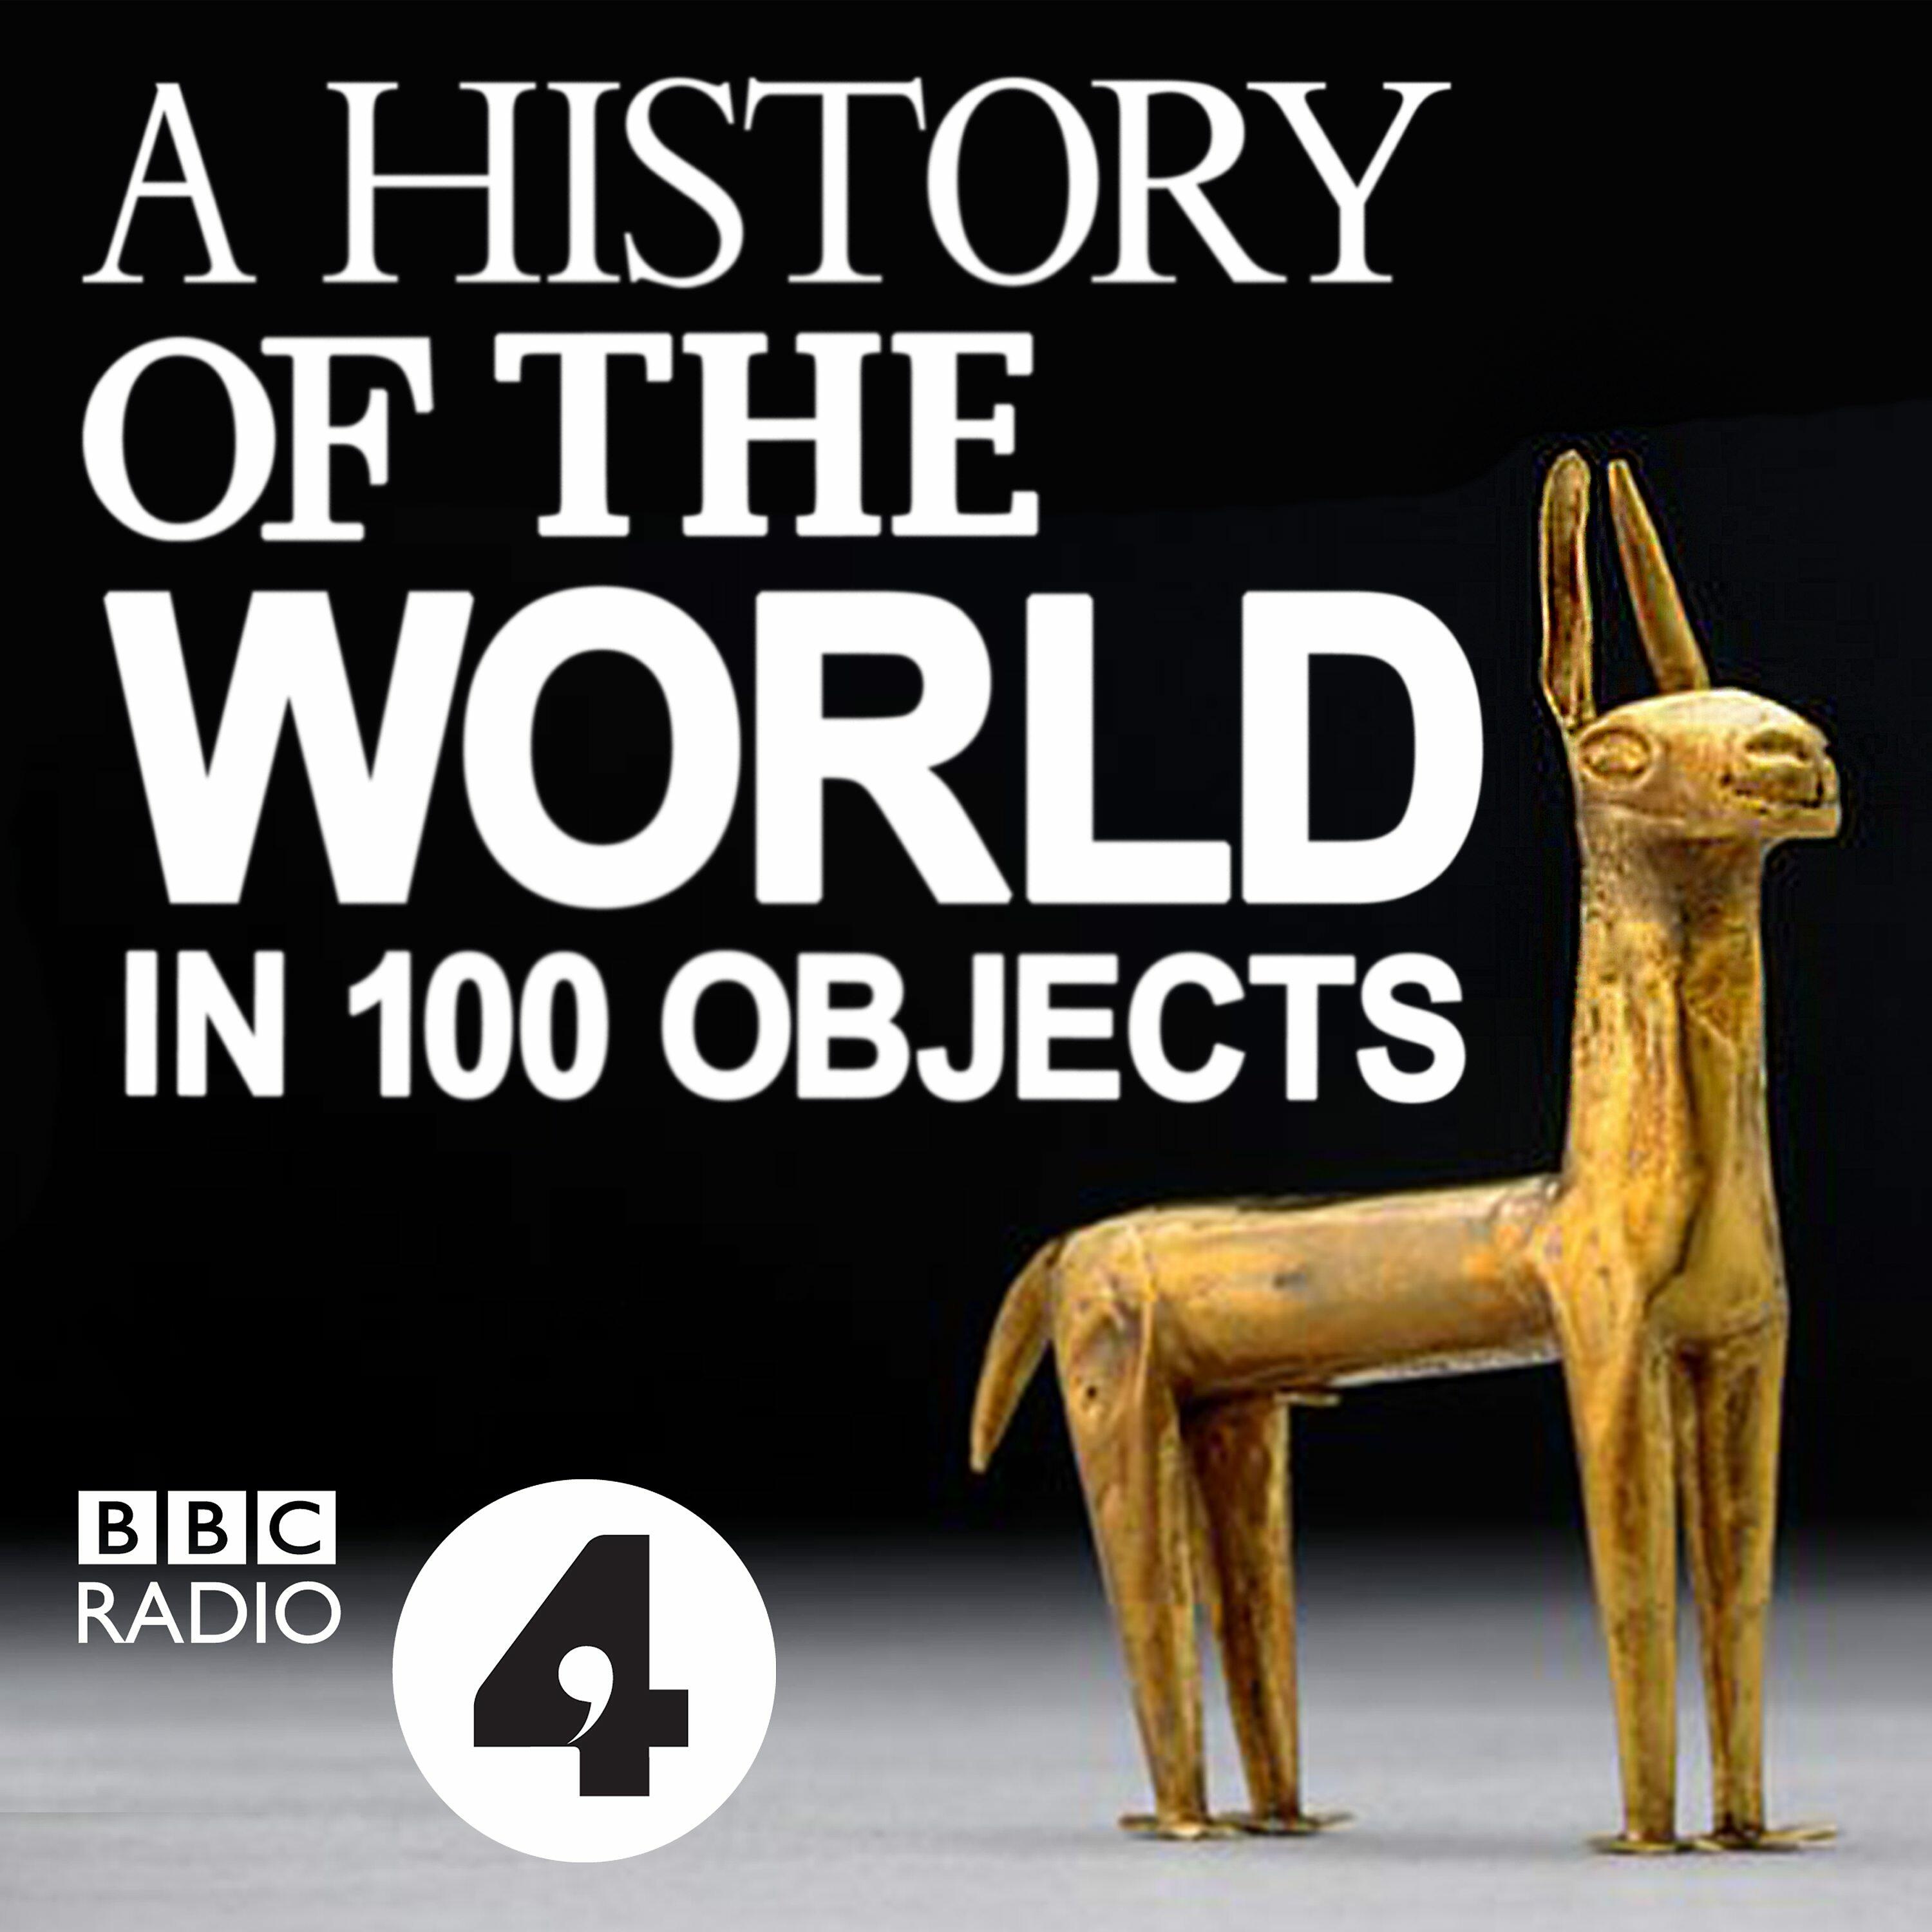 100 objects. A History of the World in 100 objects by Neil MACGREGOR.